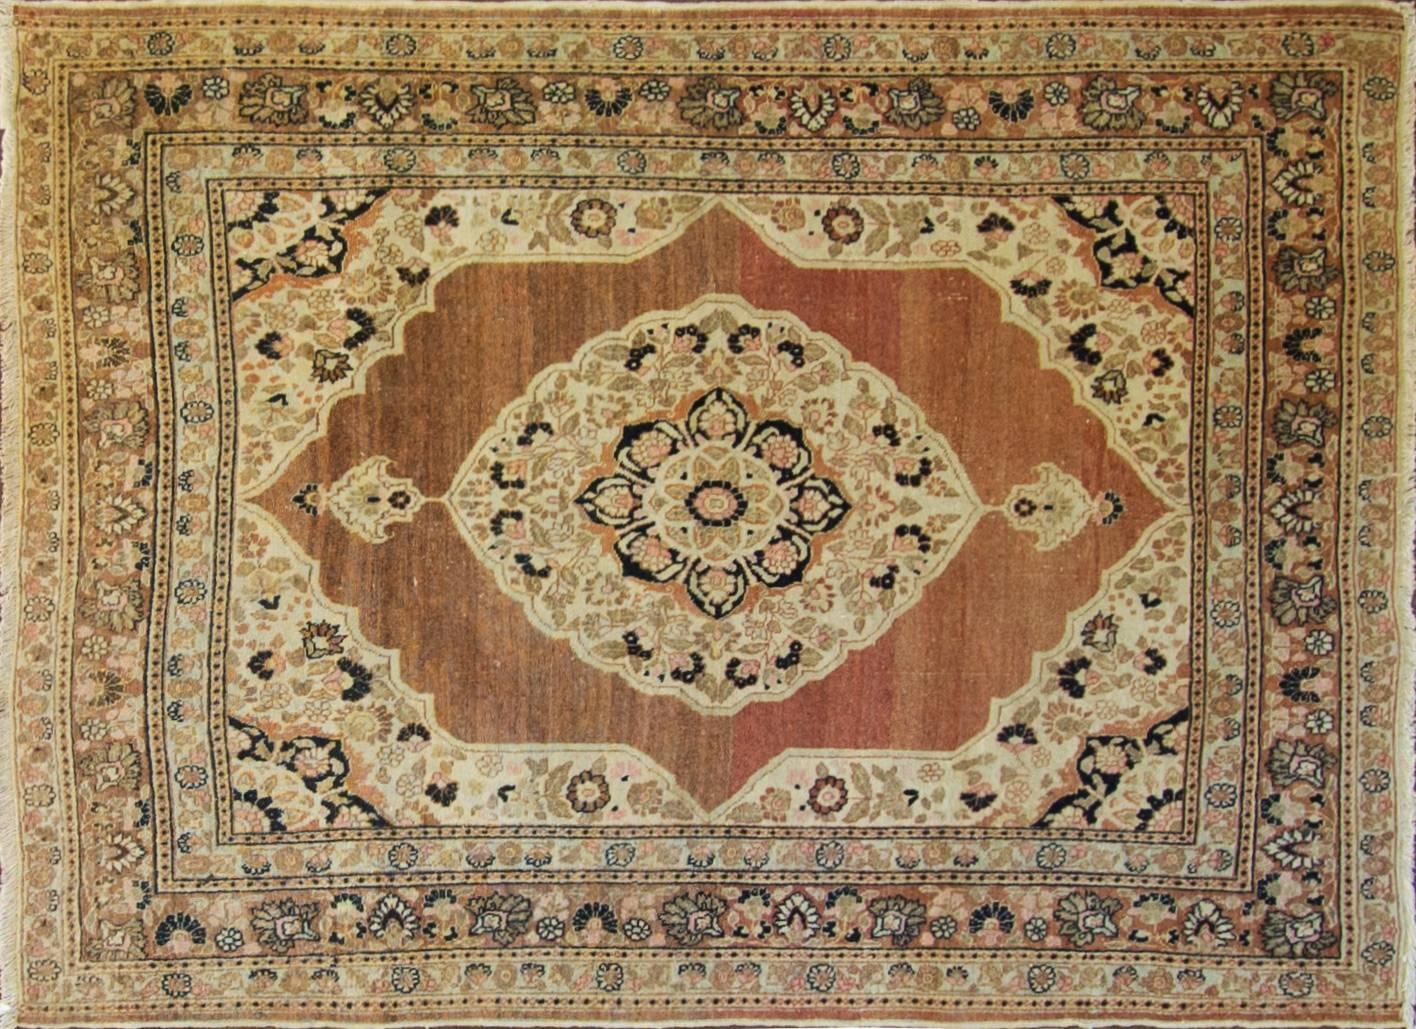 Tabriz carpets are distinguished by their excellent weave and by their remarkable adherence to the classical traditions of Persian rug design. The city of Tabriz, was the earliest capital of the Safavid dynasty. One of the most important figures in